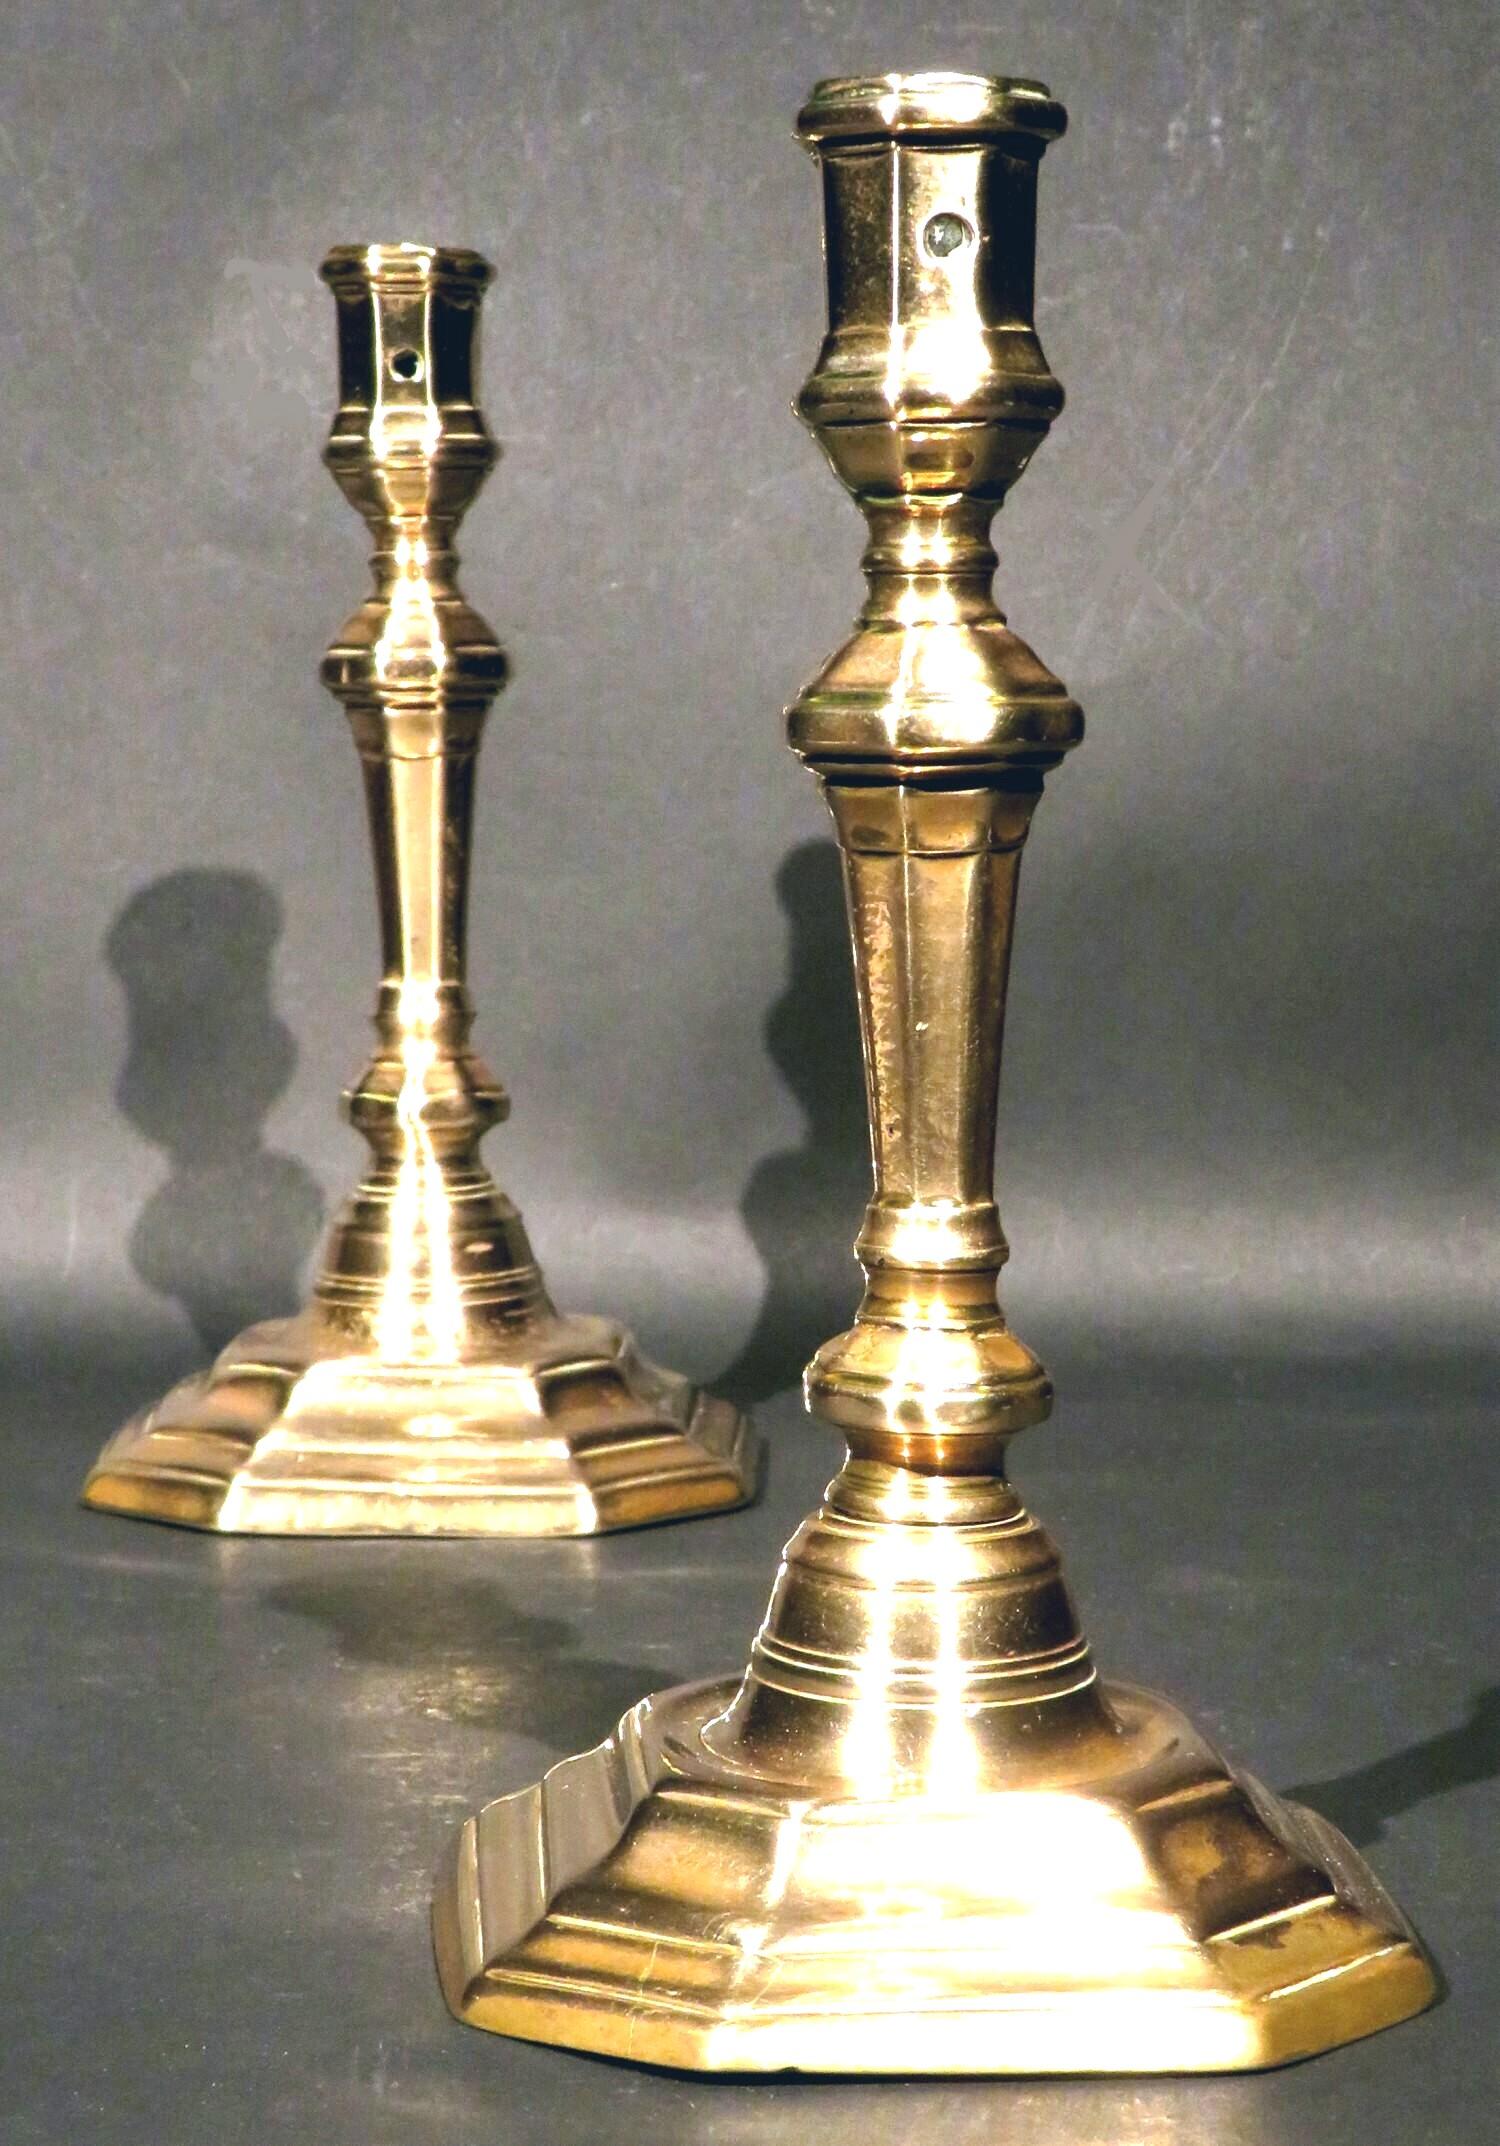 A very handsome and rare pair of early 18th century bell metal candlesticks, both showing flaring stems with cushioned & faceted knops terminating to octagonal panelled nozzles, rising from welled and stepped octagonal bases. Both exhibiting an